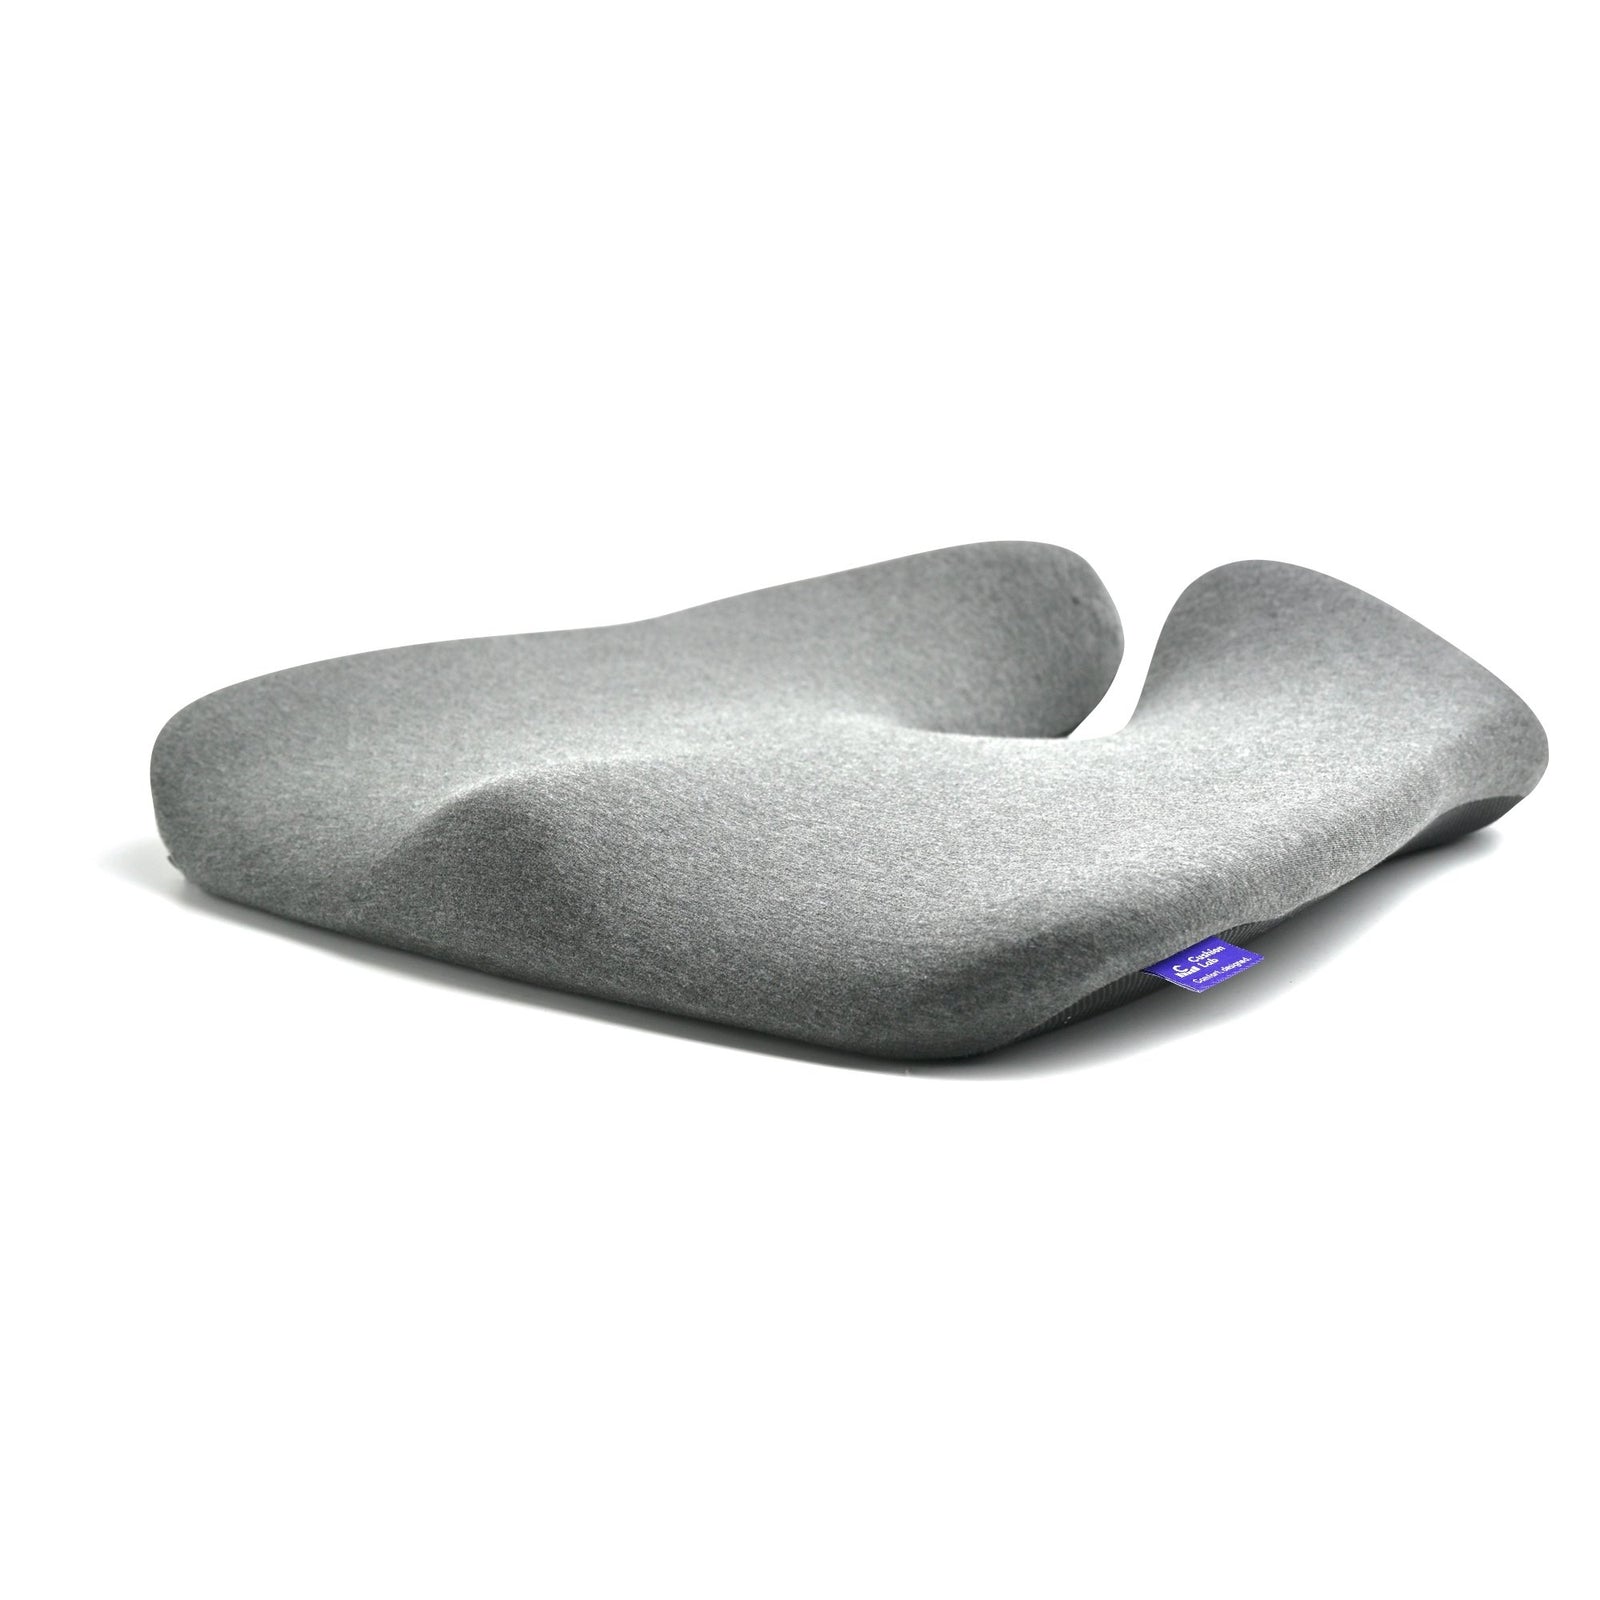 Lumbar Pillow for All-Day Working Comfort